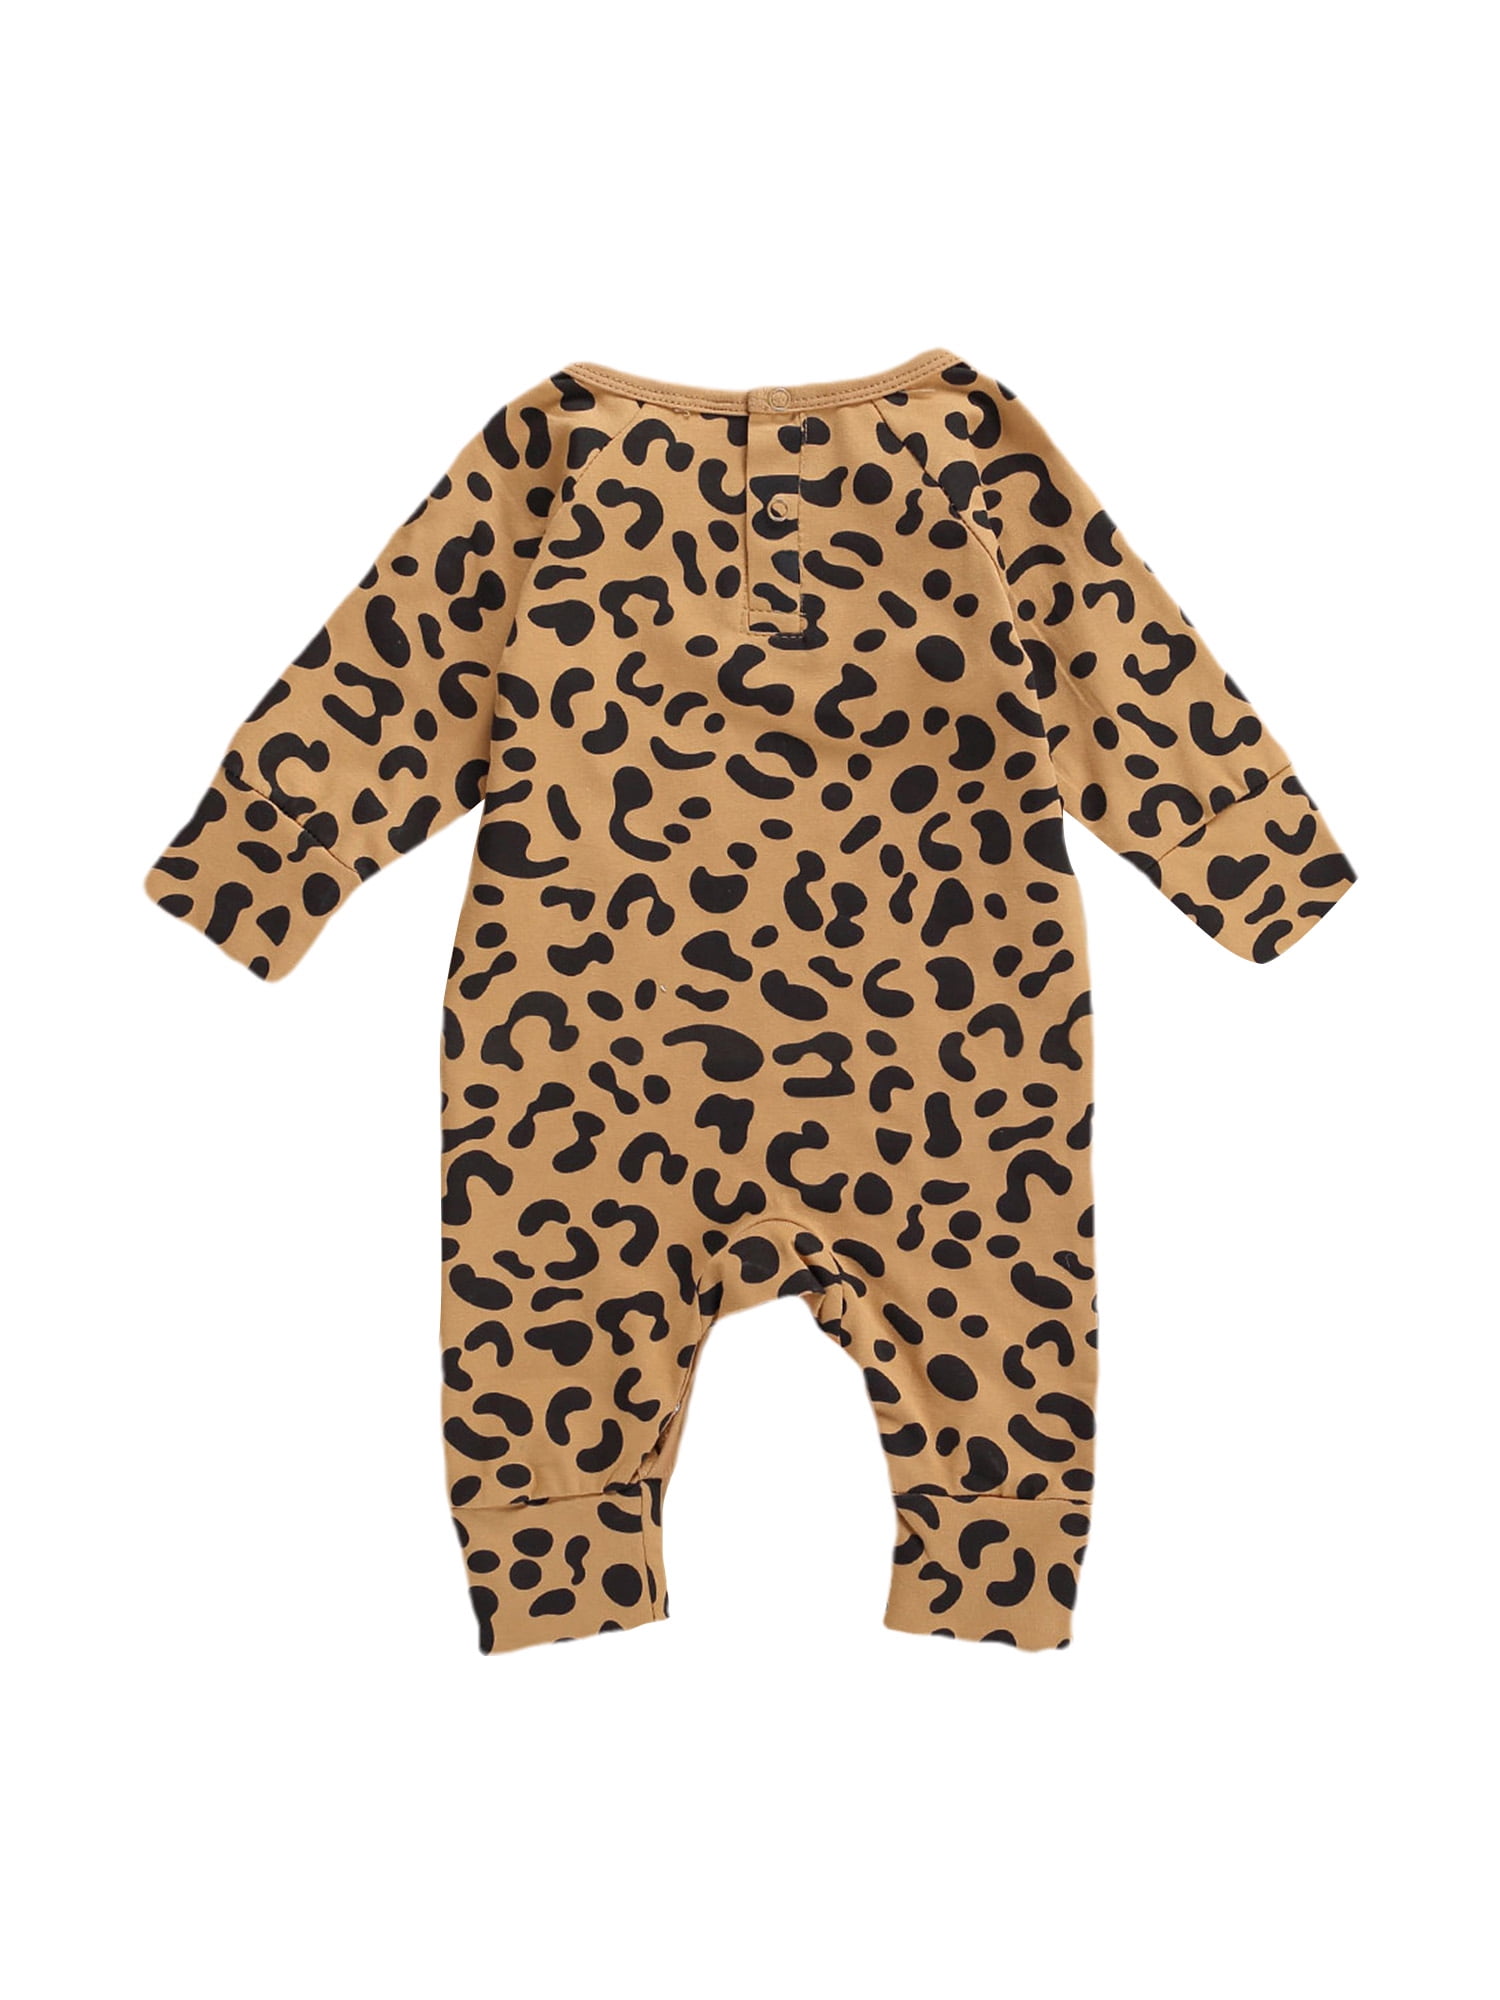 UK Newborn Toddler Baby Girl Summer Leopard Romper Jumpsuit 2PCS Outfits Clothes 